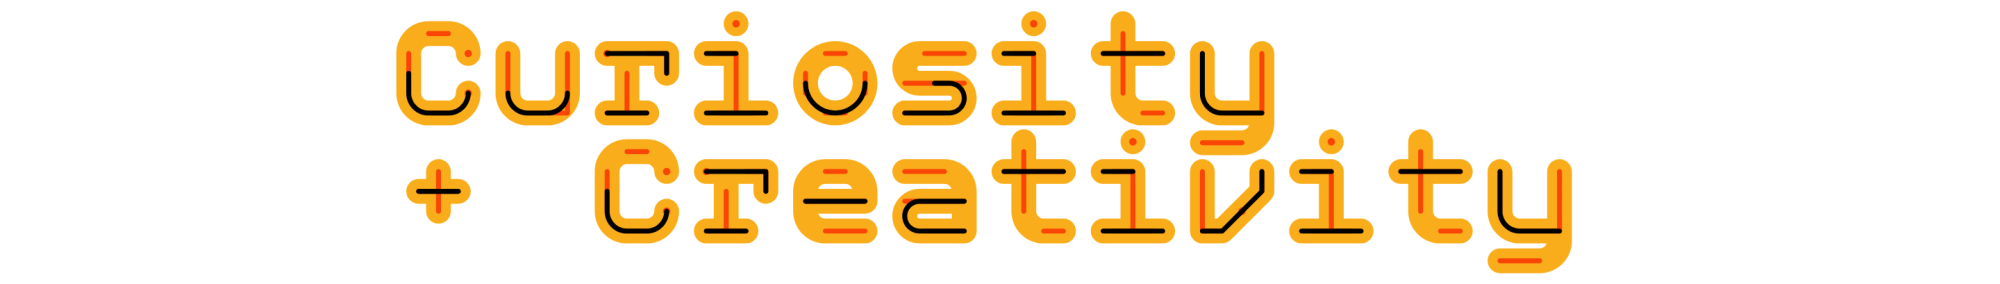 Colorful text that reads "Curiosity and Creativity"